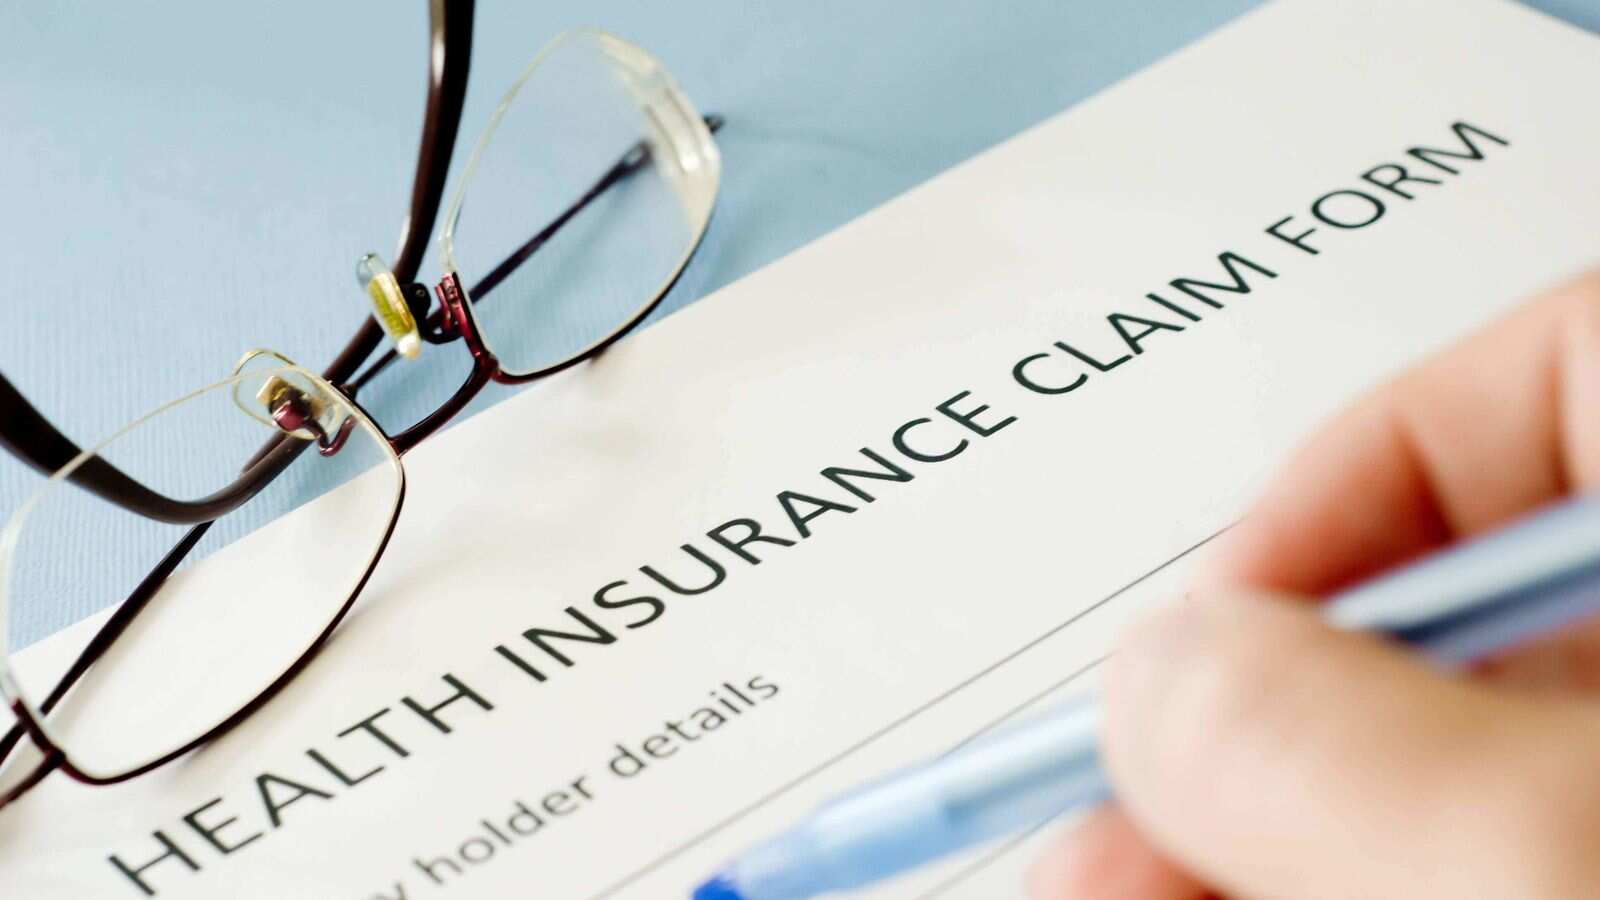 Understand All the Benefits of Not Making a Claim for Health Insurance